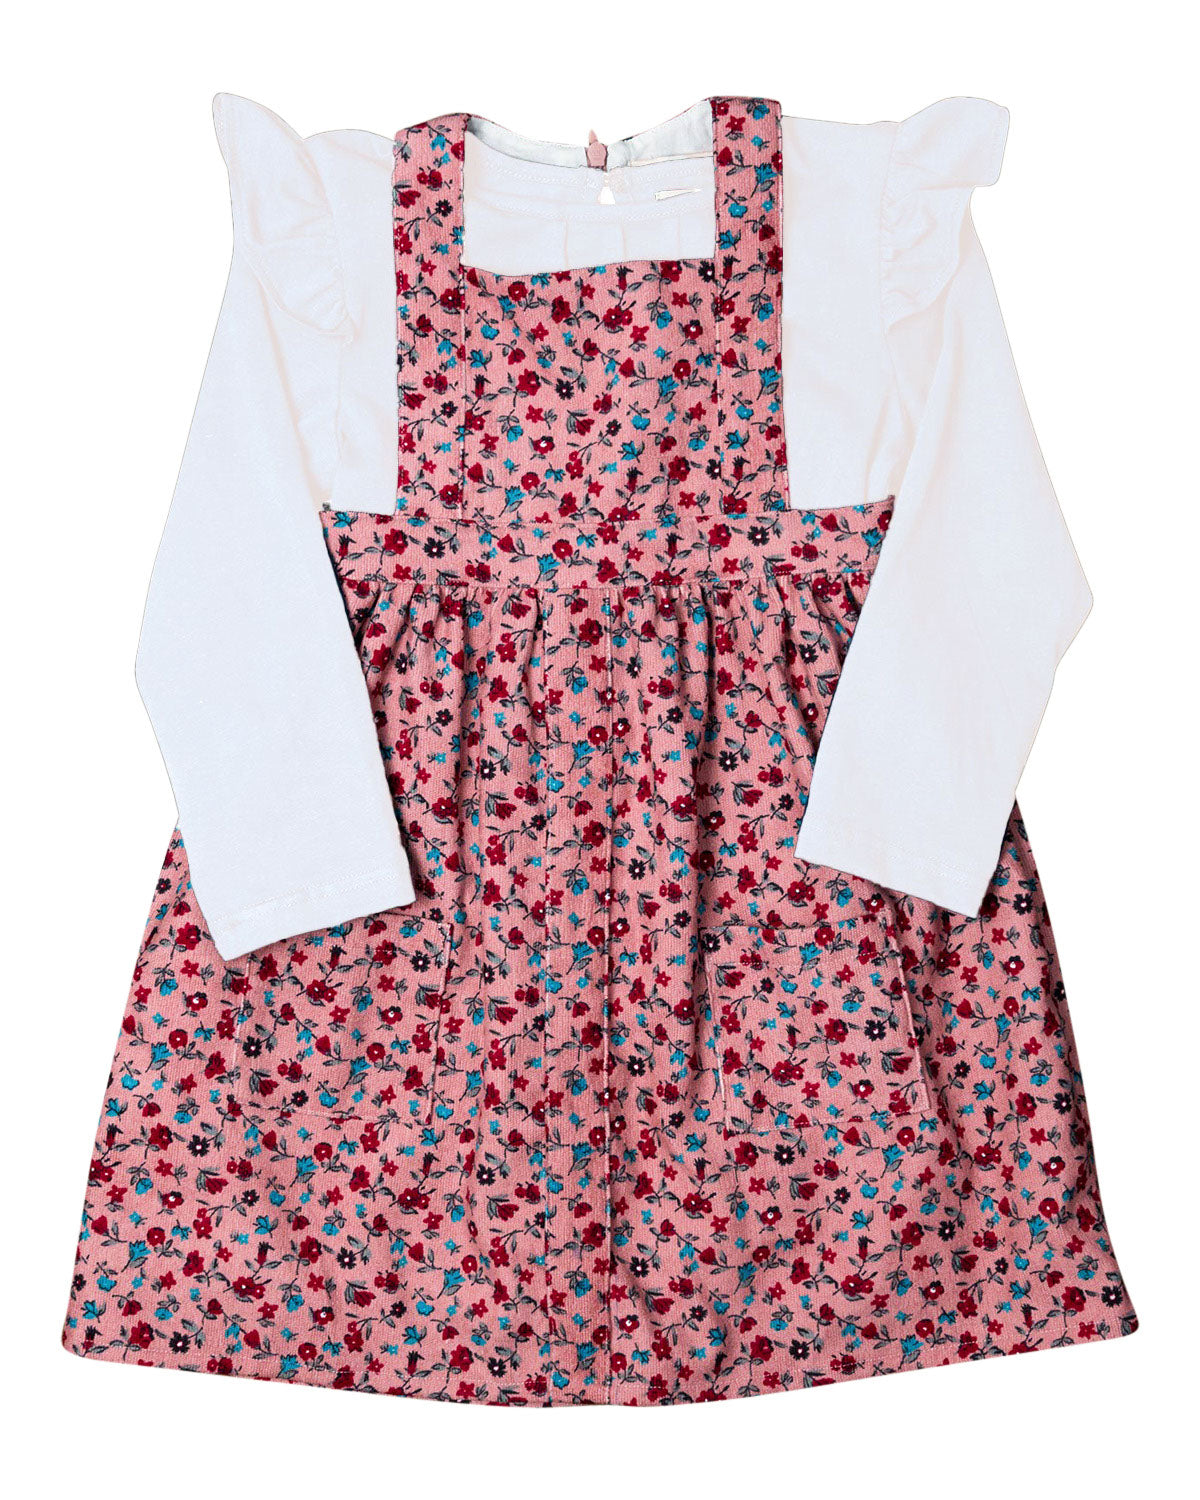 Ditsy Floral Corduroy Jumper with White Knit Shirt Set- FINAL SALE